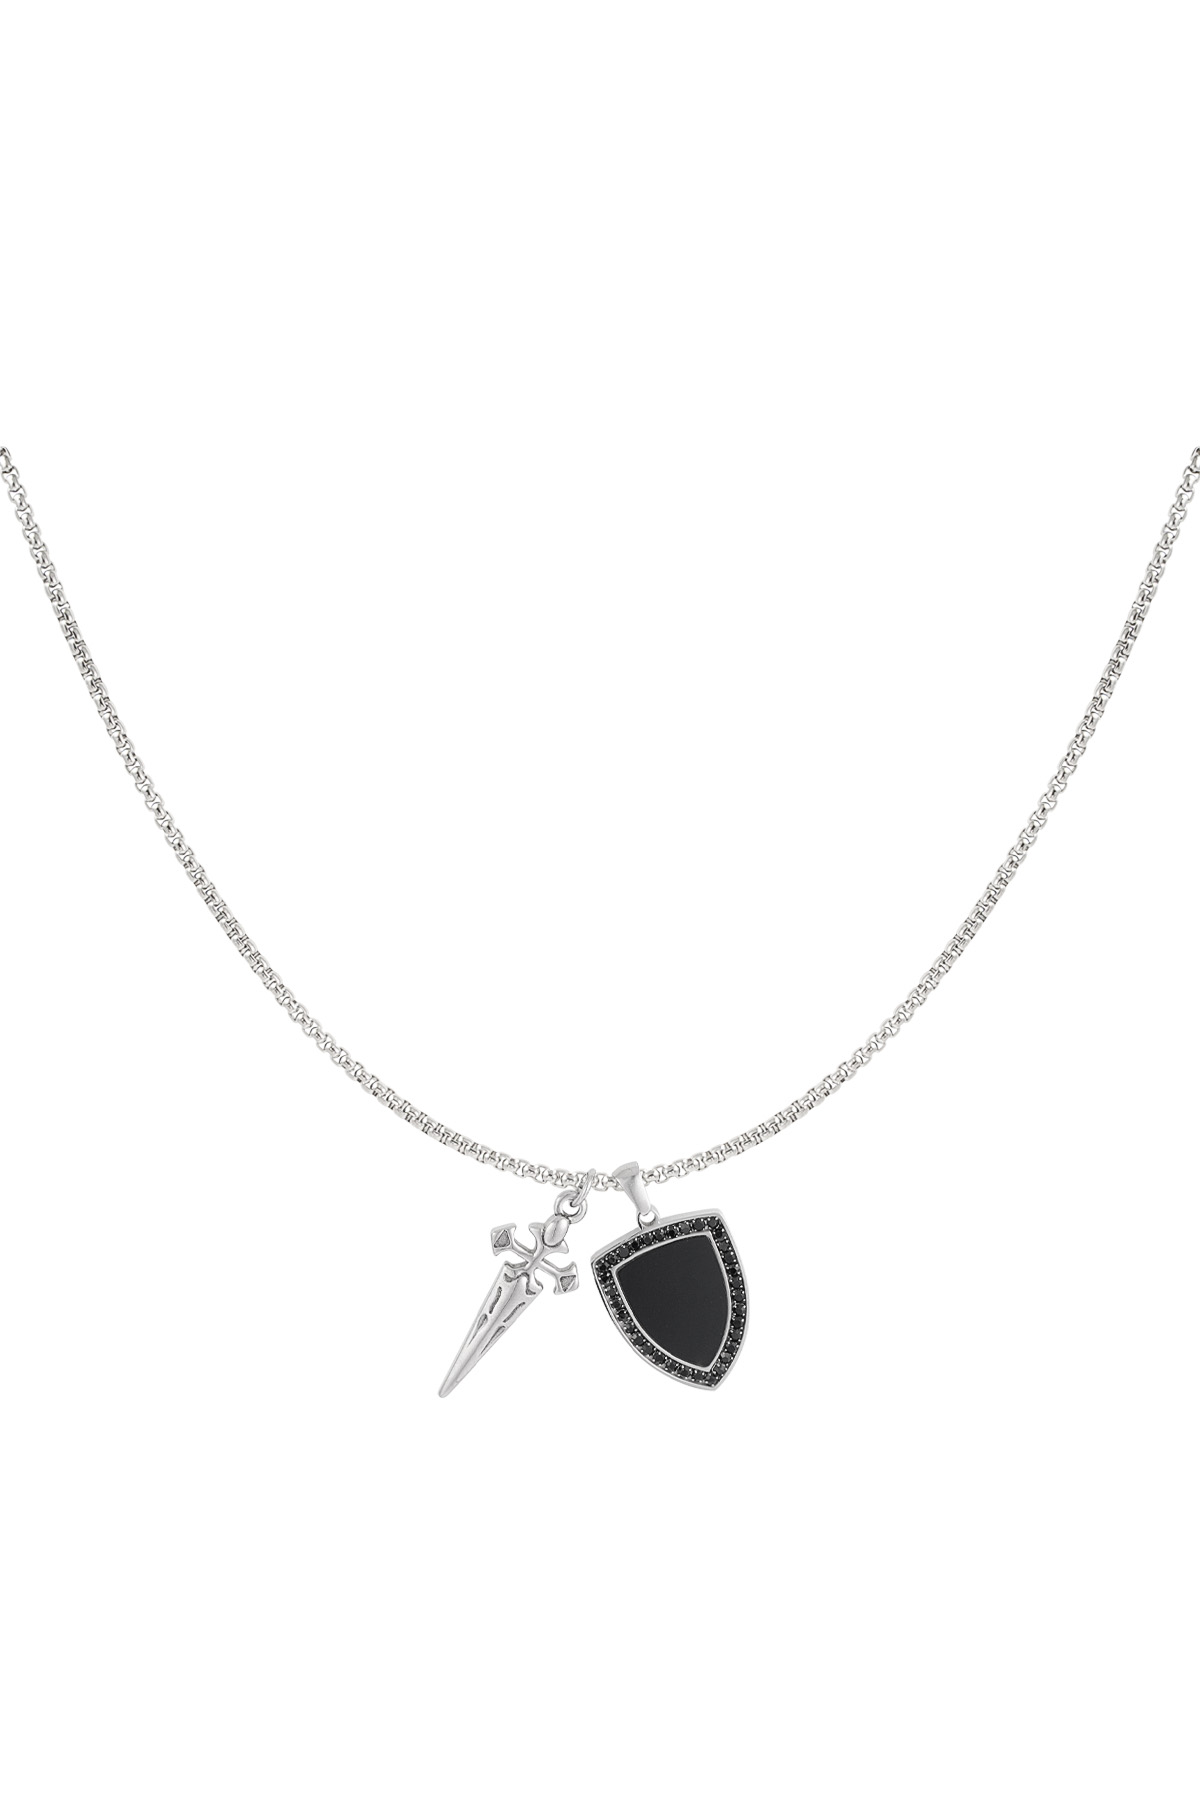 Knight men's necklace - silver 